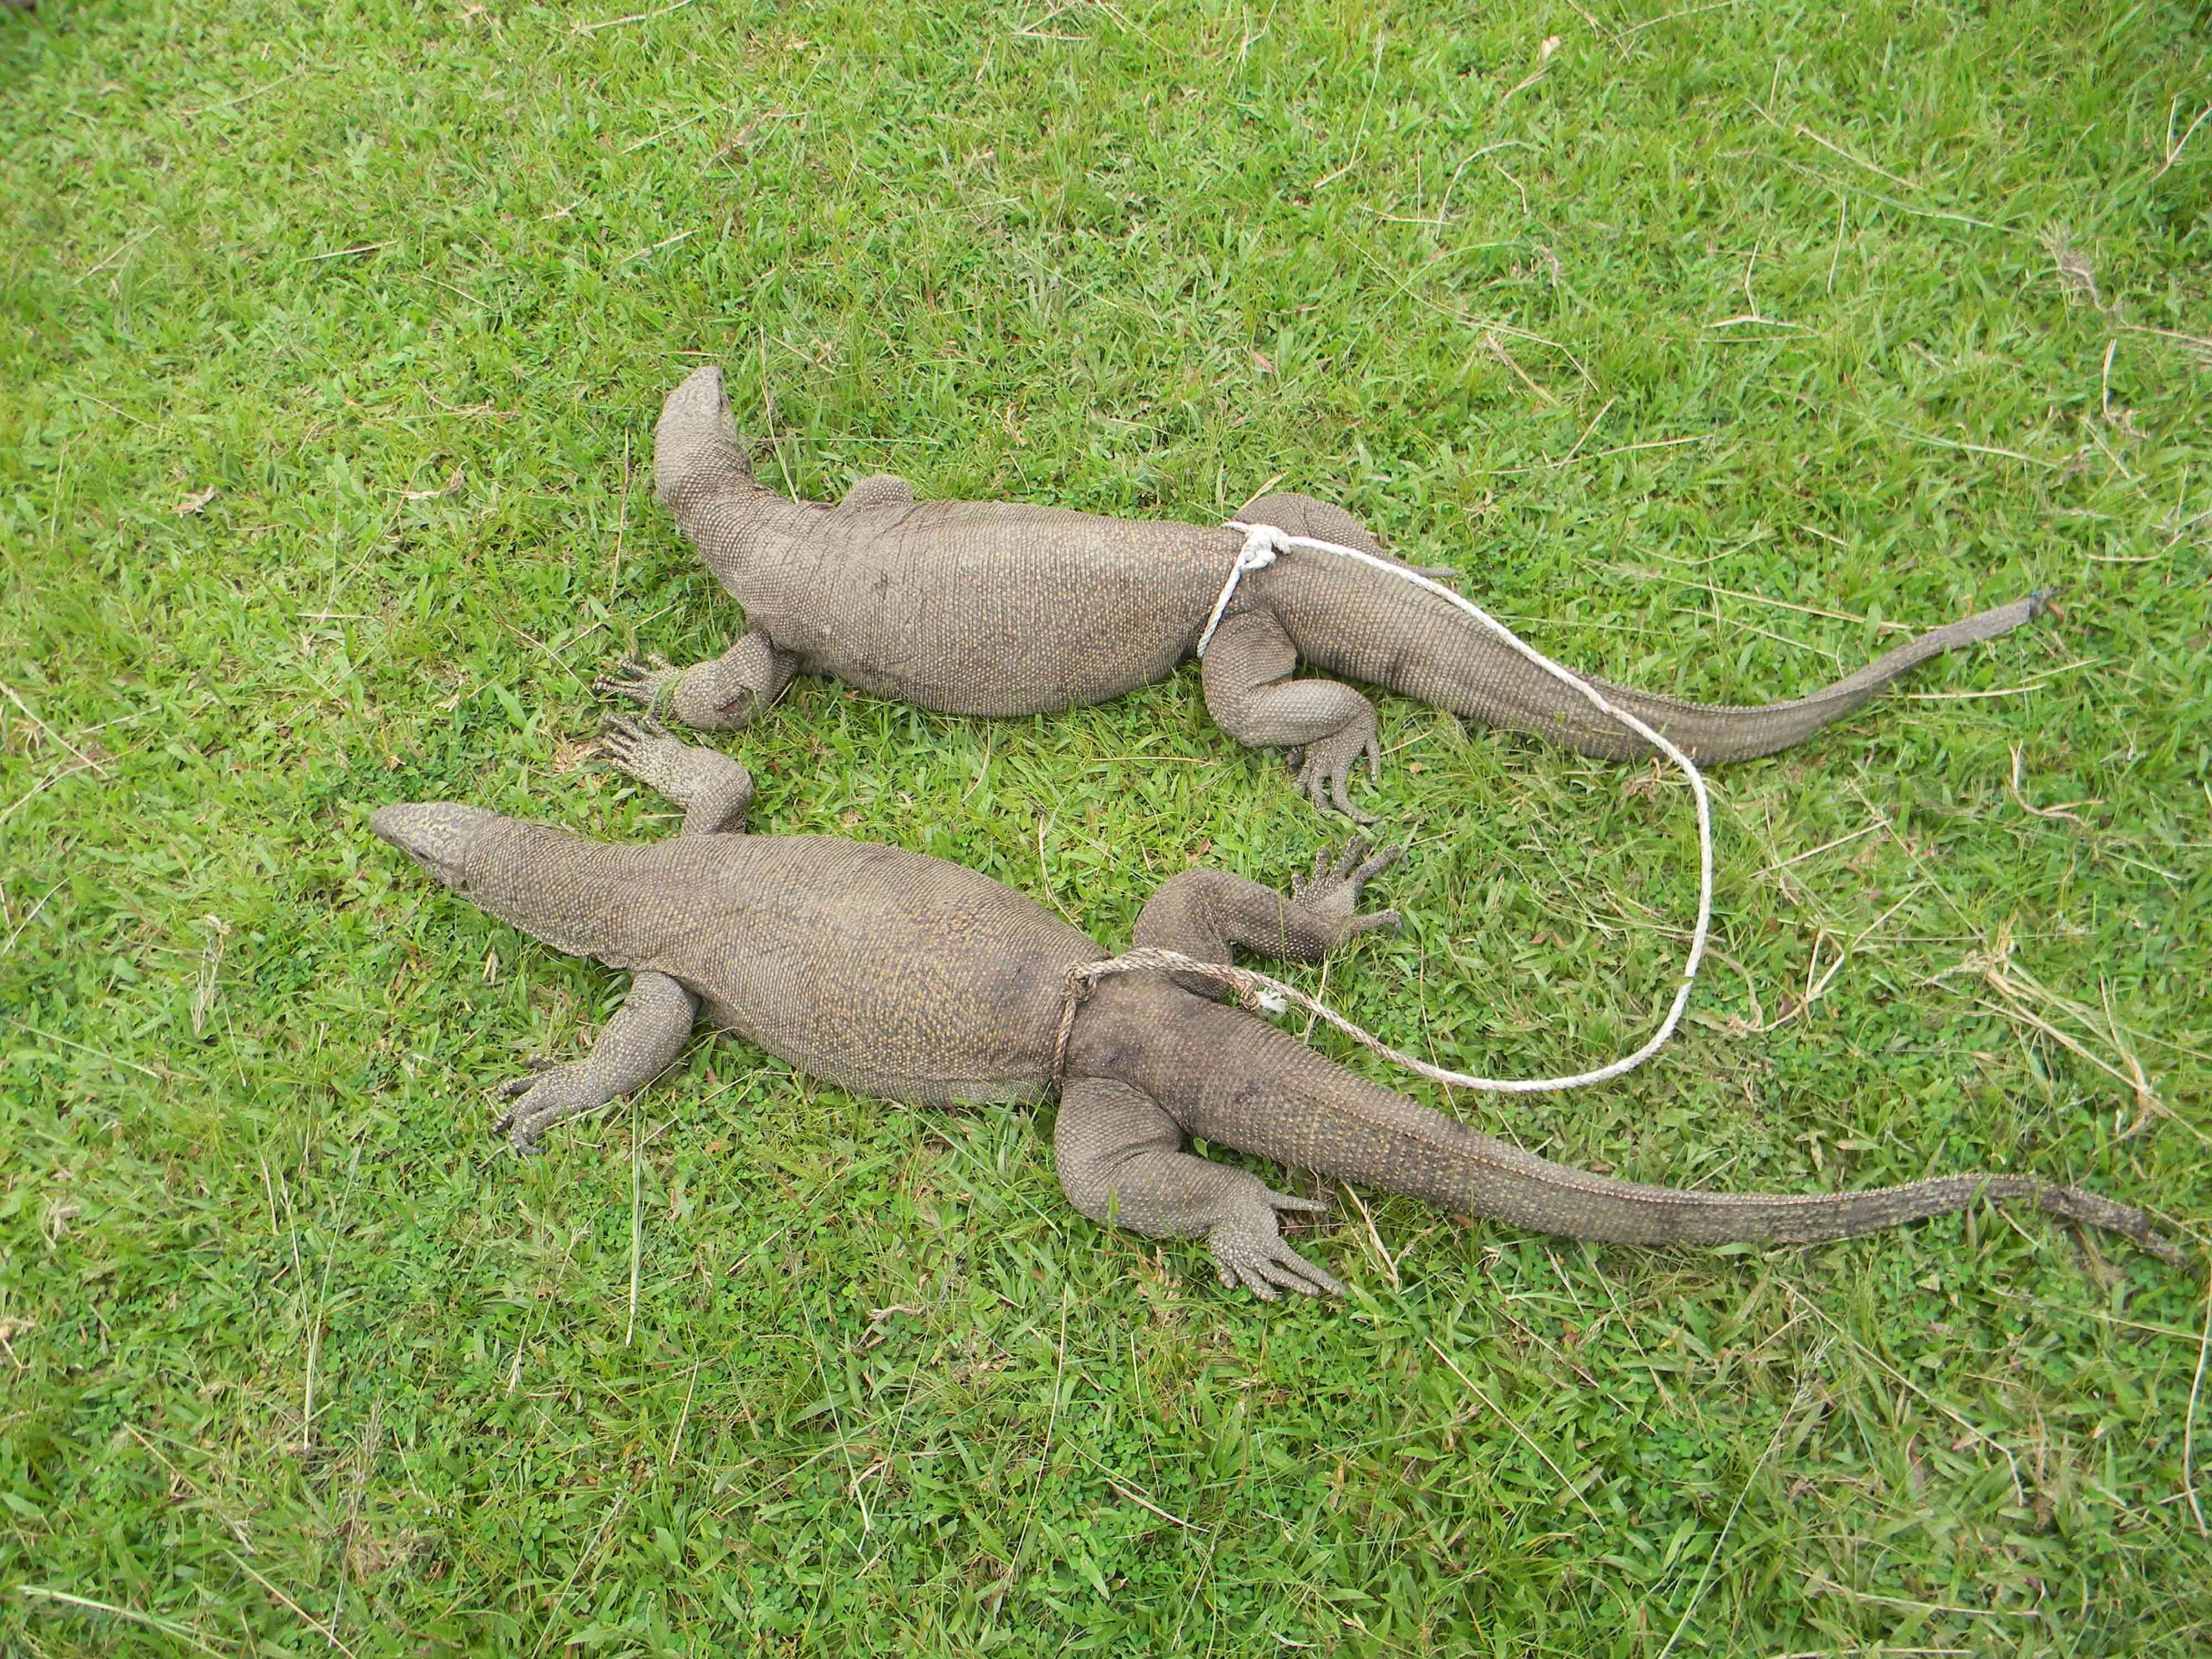 Monitor lizards tied together